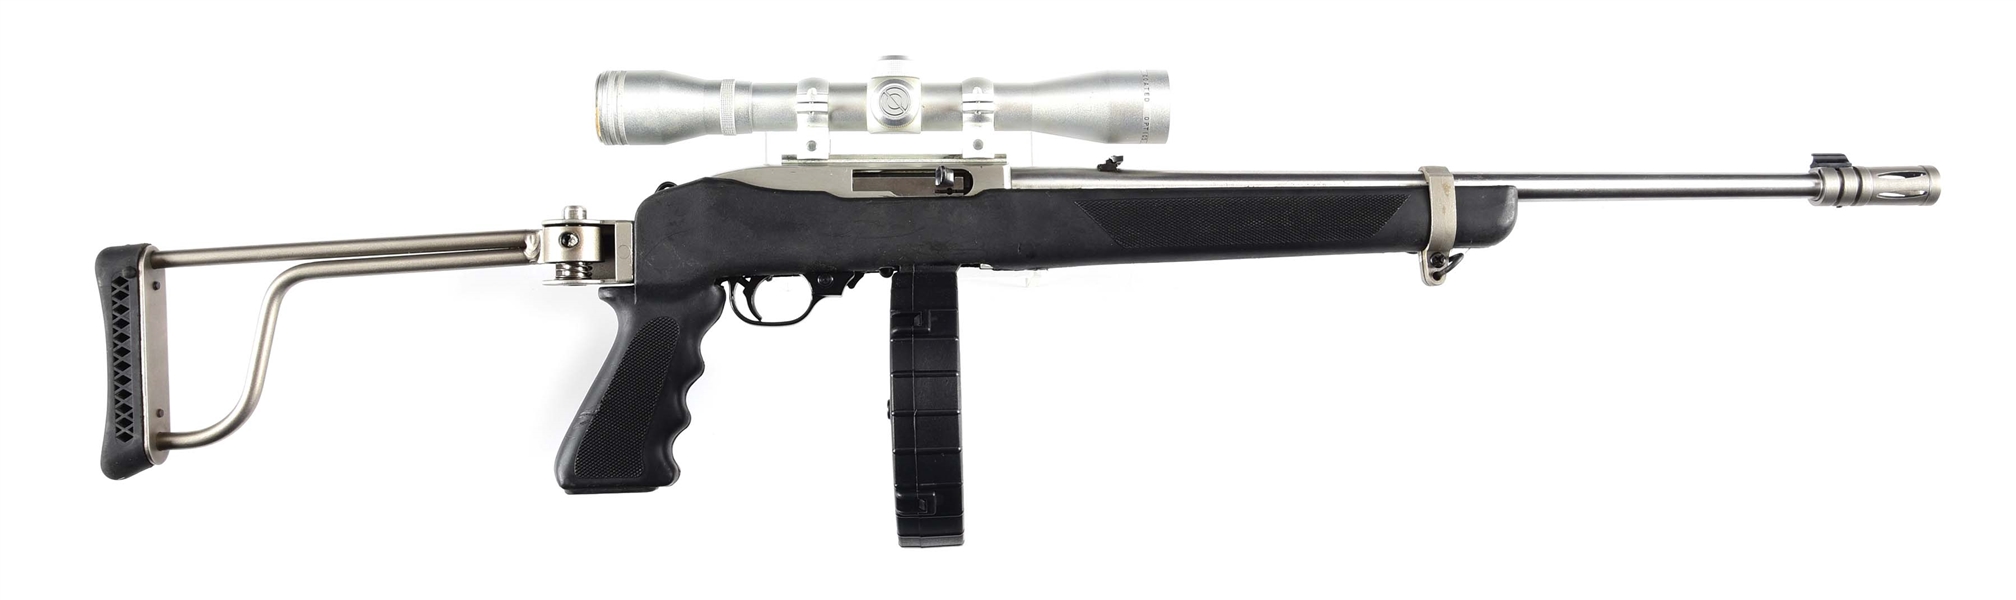 (N) ALWAYS DESIRABLE RUGER 10/22 HOST GUN WITH S&H ARMS AUTO SEAR MACHINE GUN. (FULLY TRANSFERABLE).